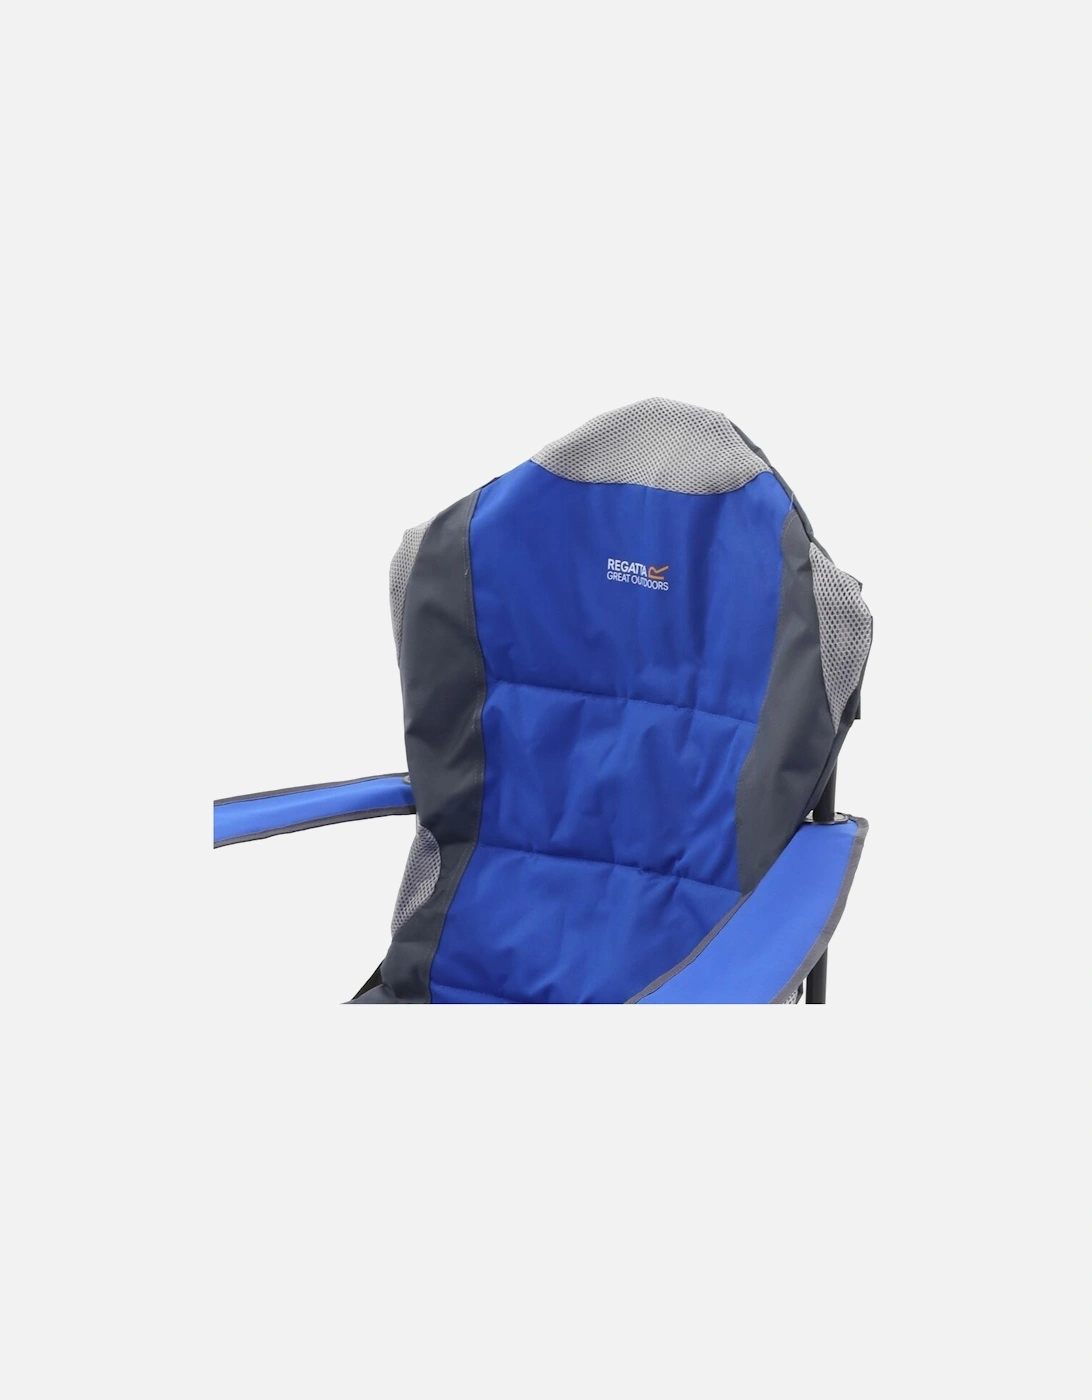 Great Outdoors Kruza Camping Chair